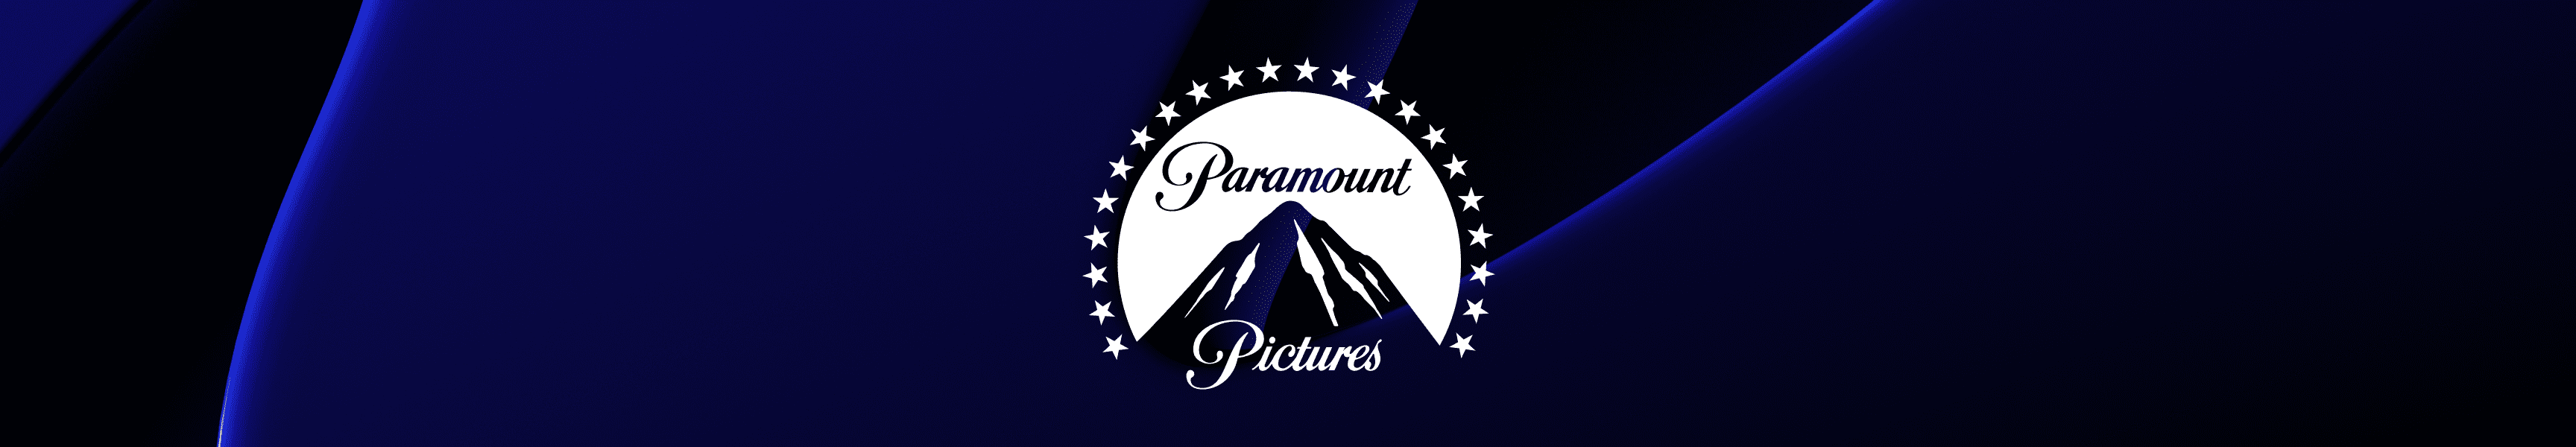 Paramount Pictures T-Shirts